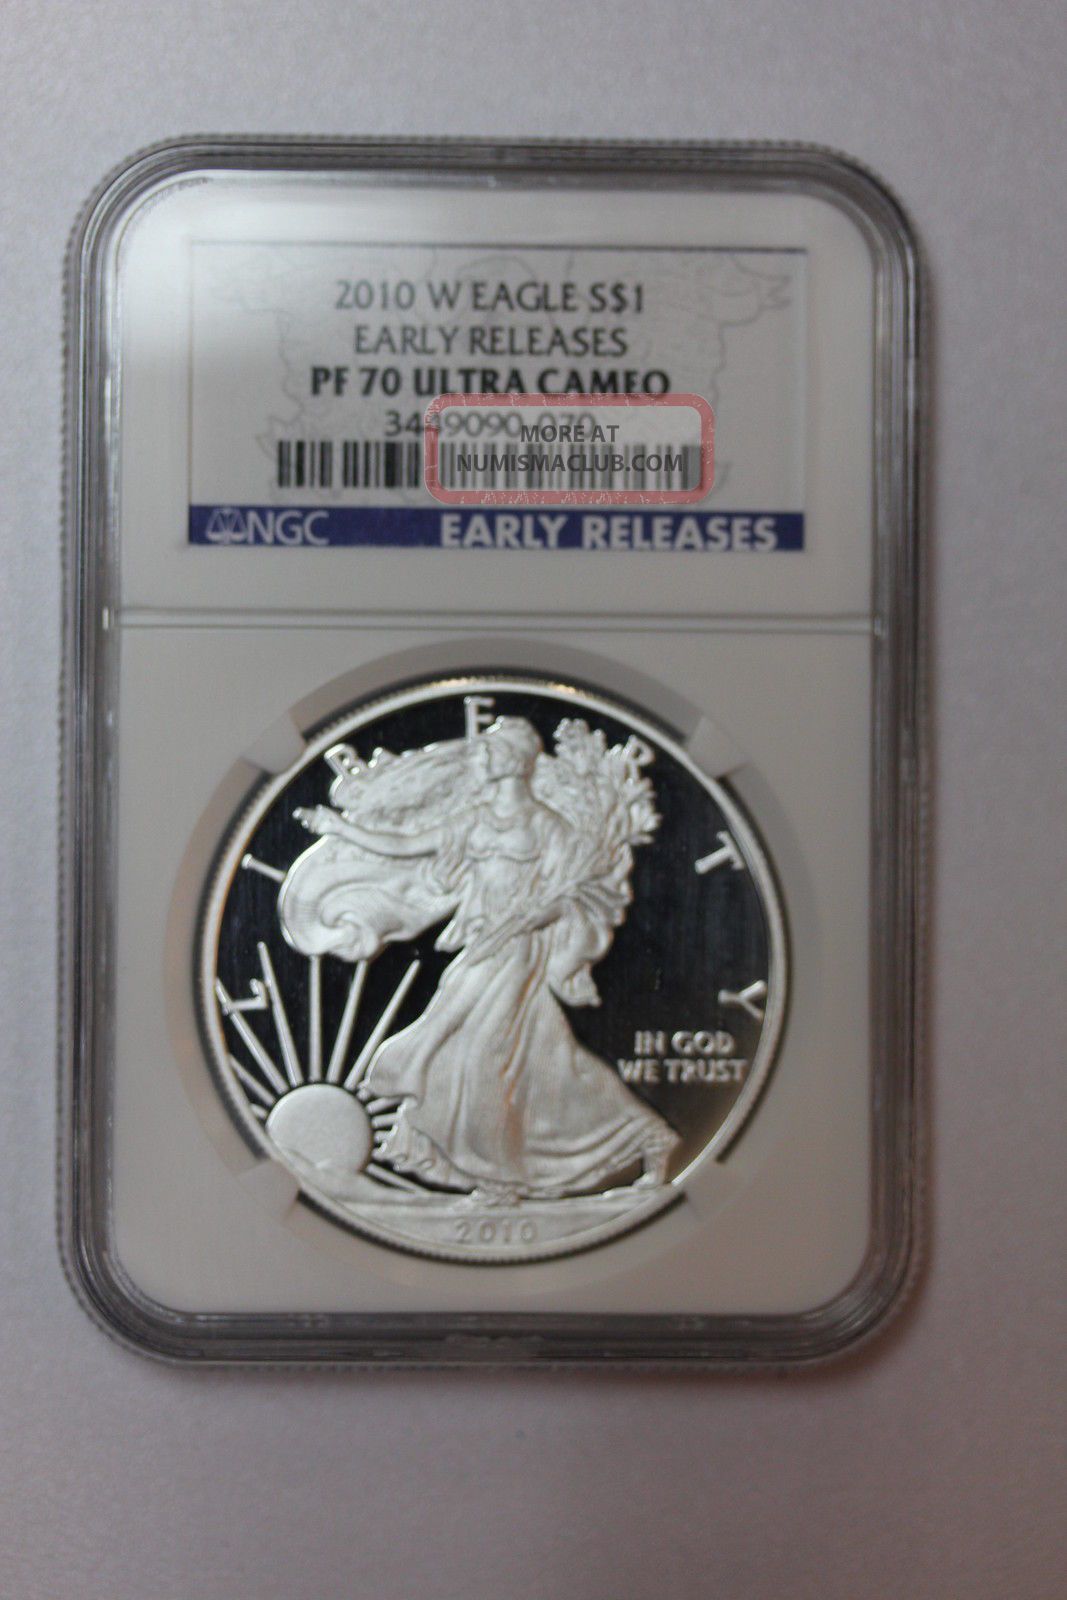 Us 2010 W Proof Ngc Pf70 Early Release $1 Silver Eagle Coin 1 Oz Ultra